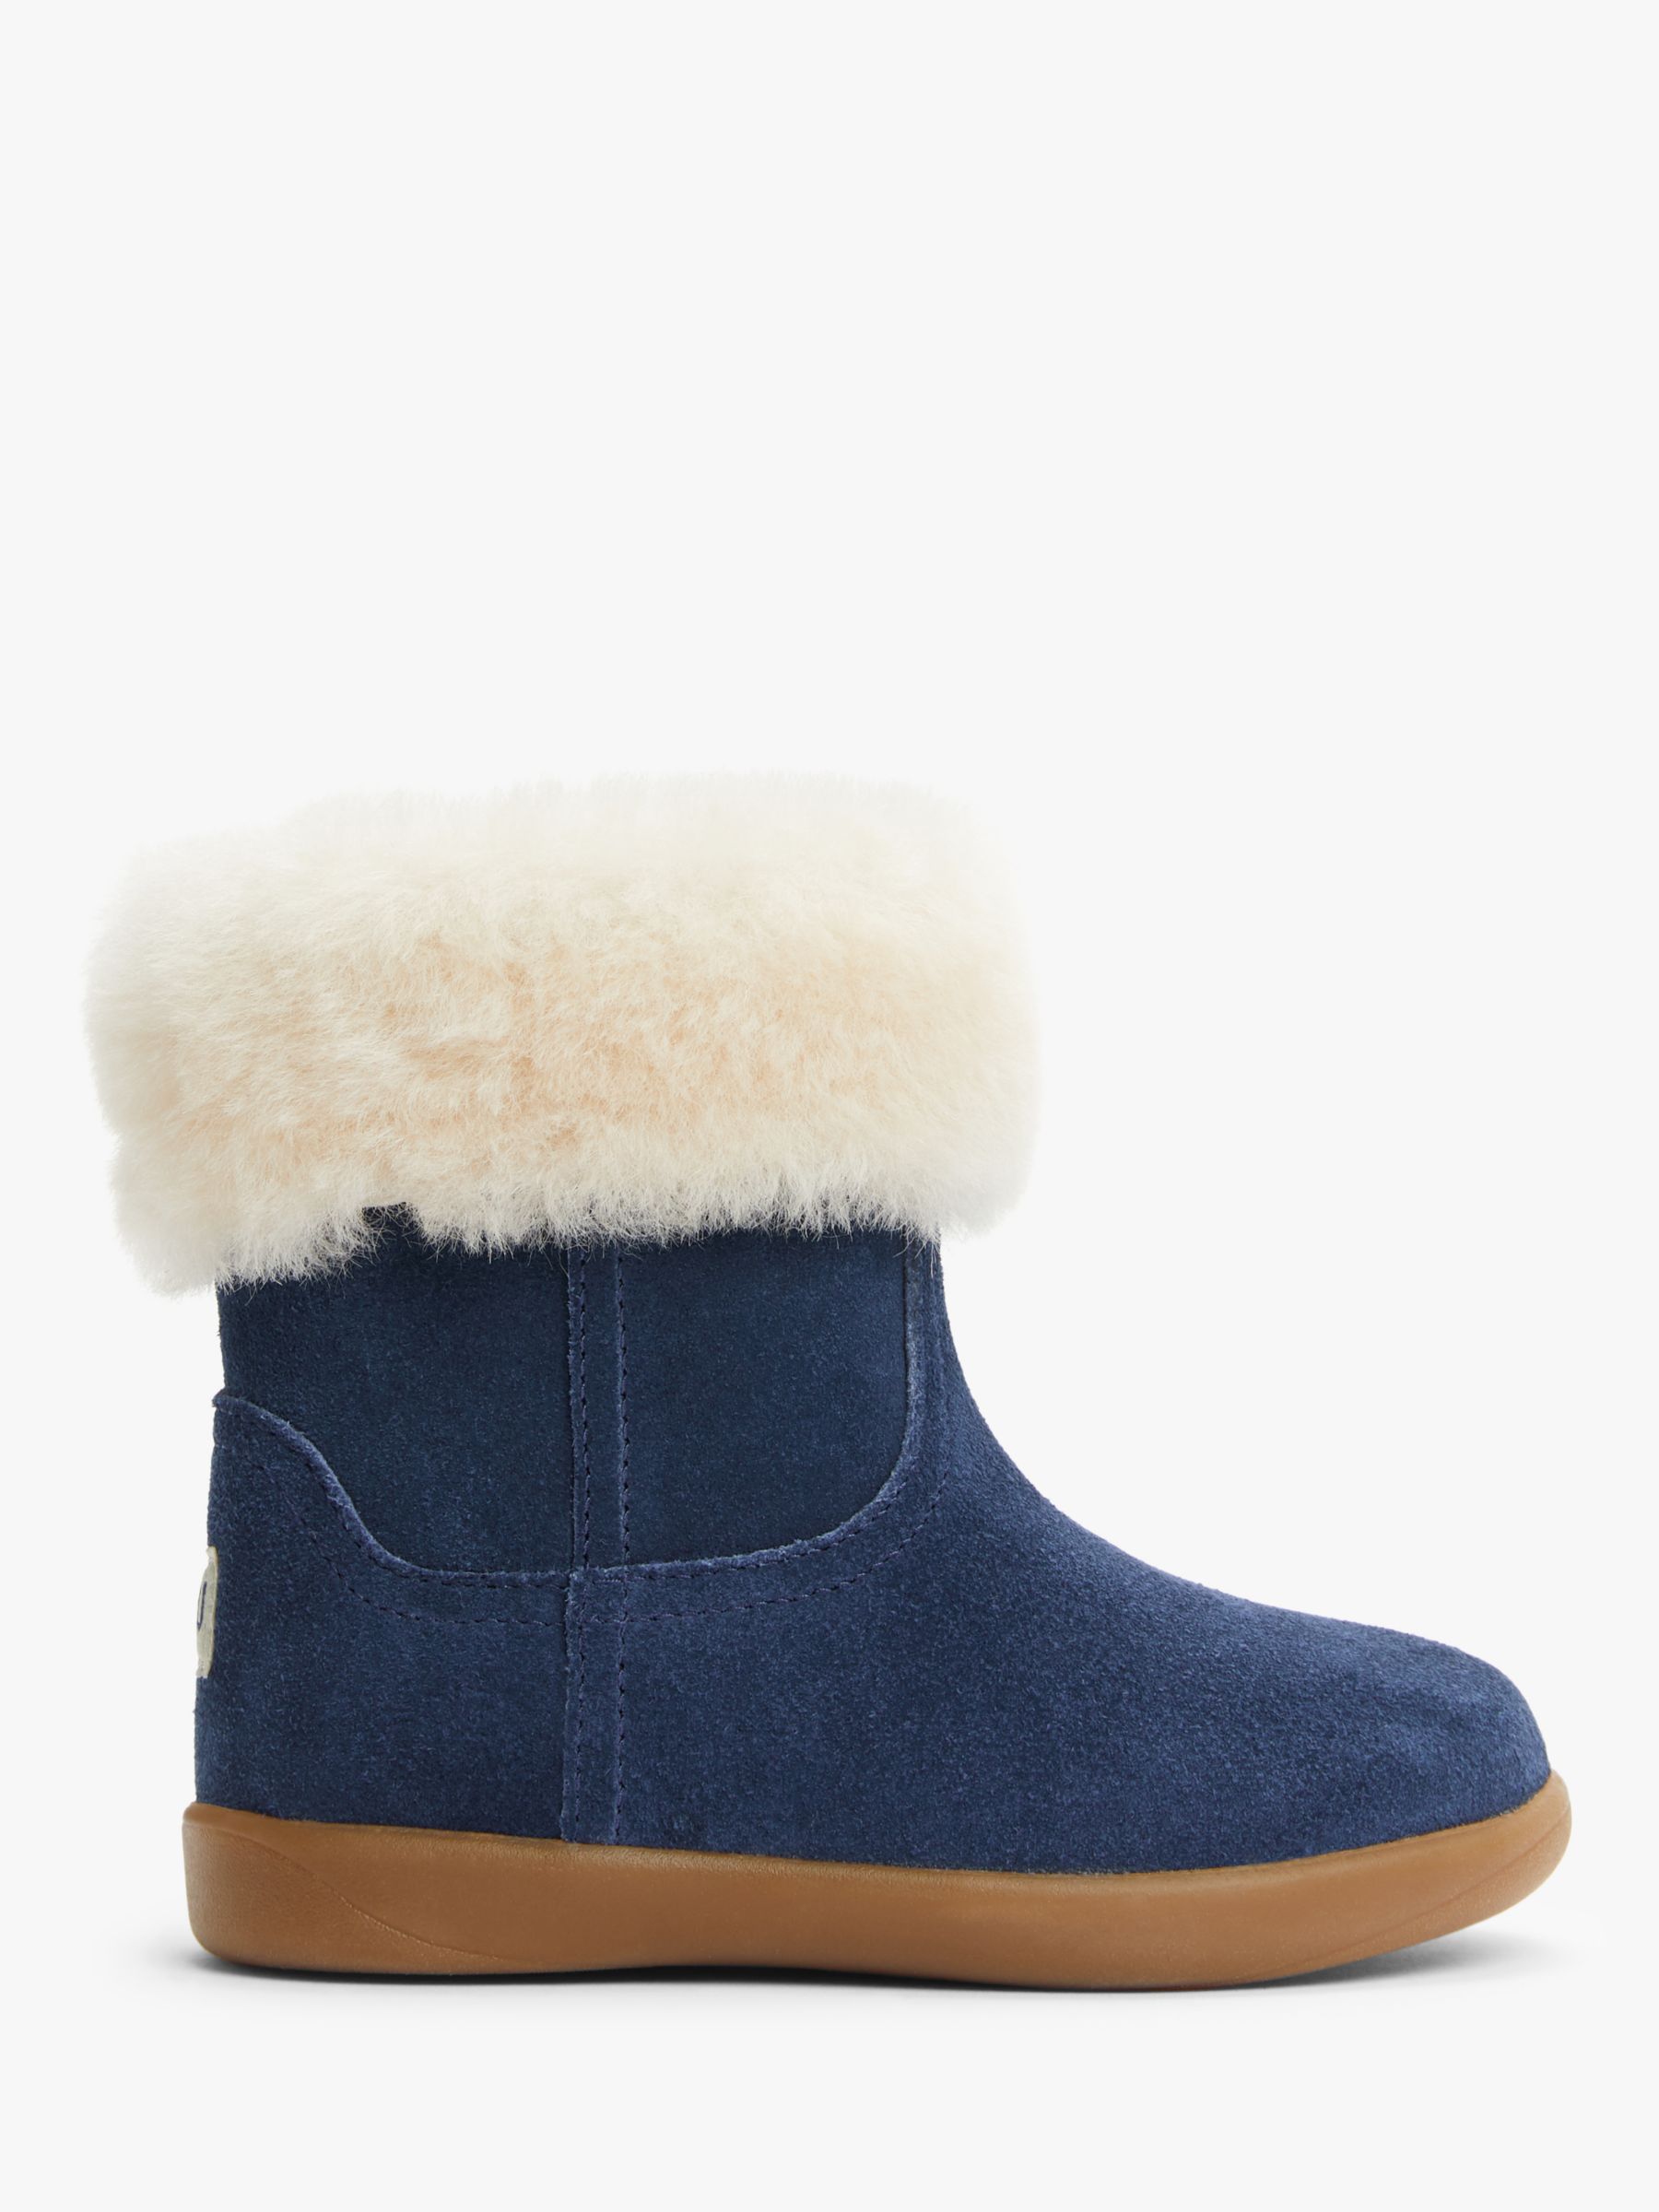 ugg navy boots